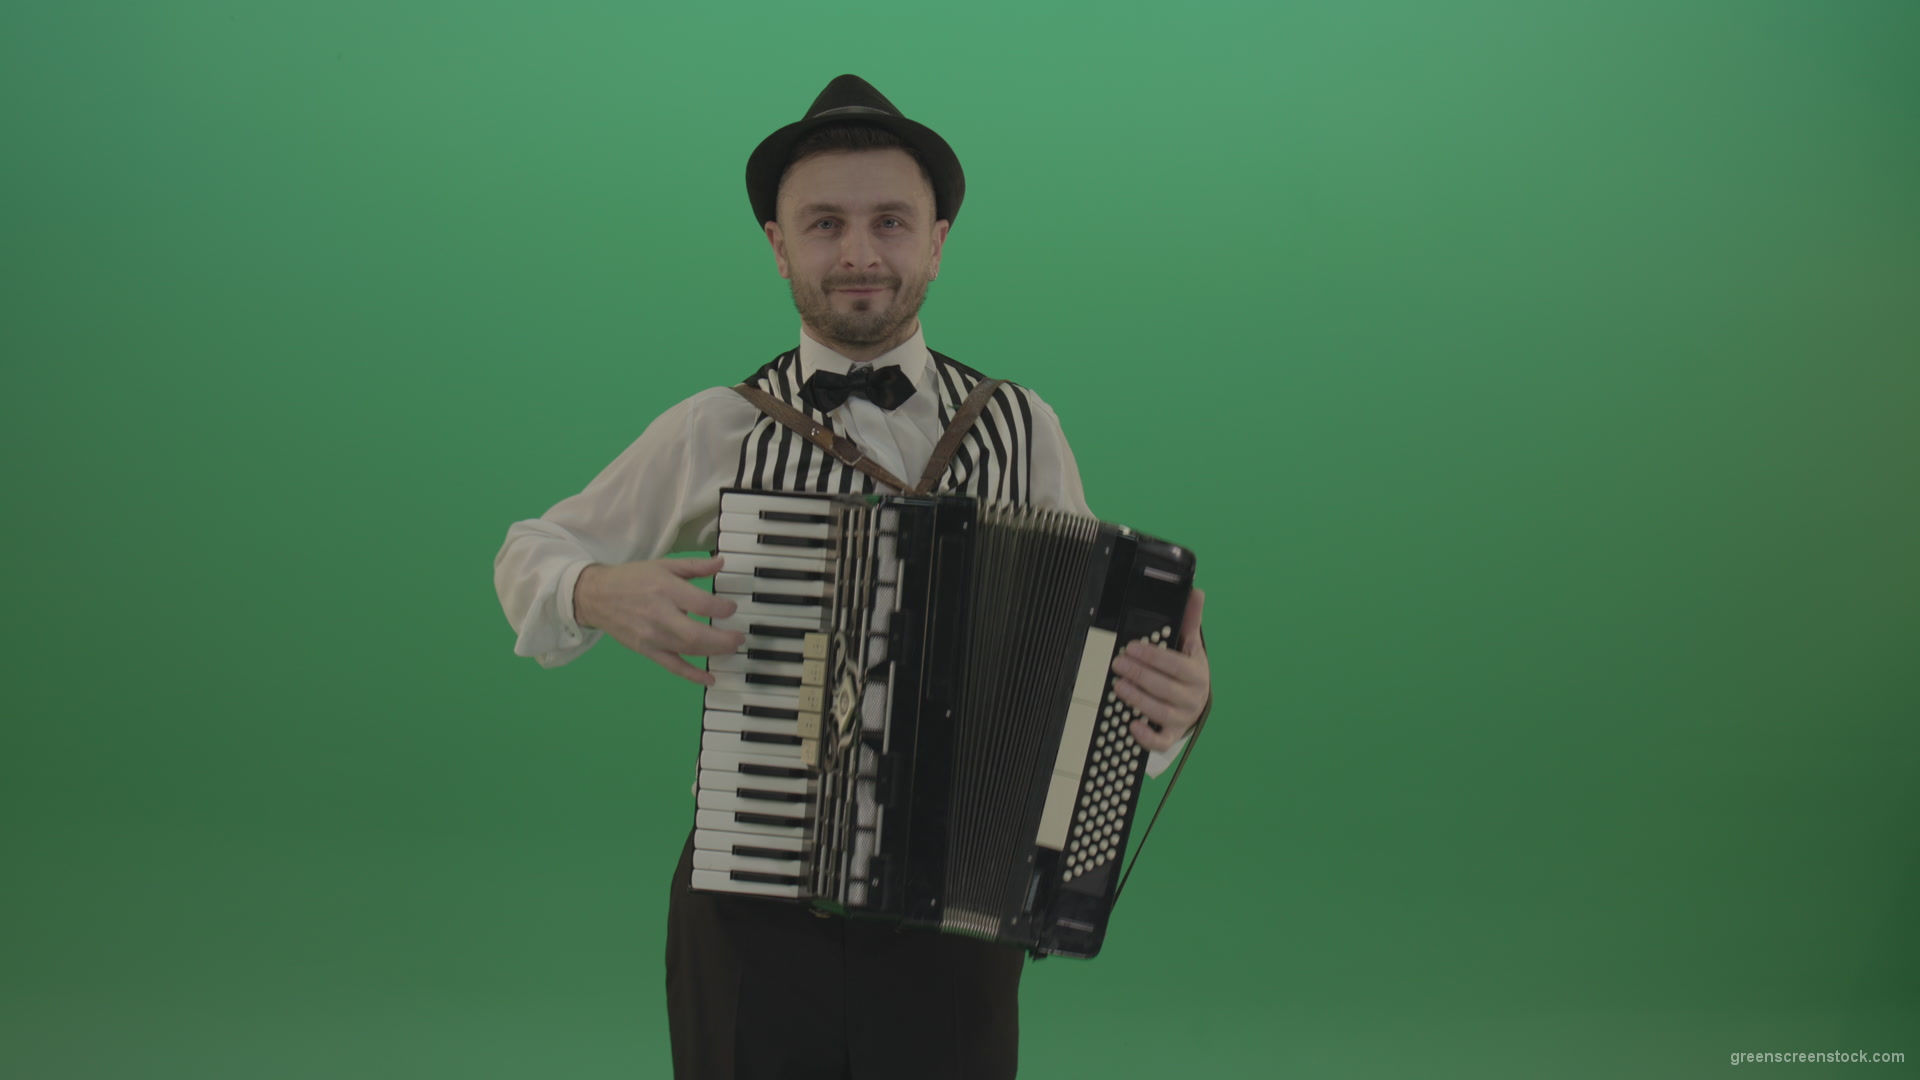 Virtuoso-player-man-with-Accordion-isolated-on-green-screen-in-front-view-1_002 Green Screen Stock